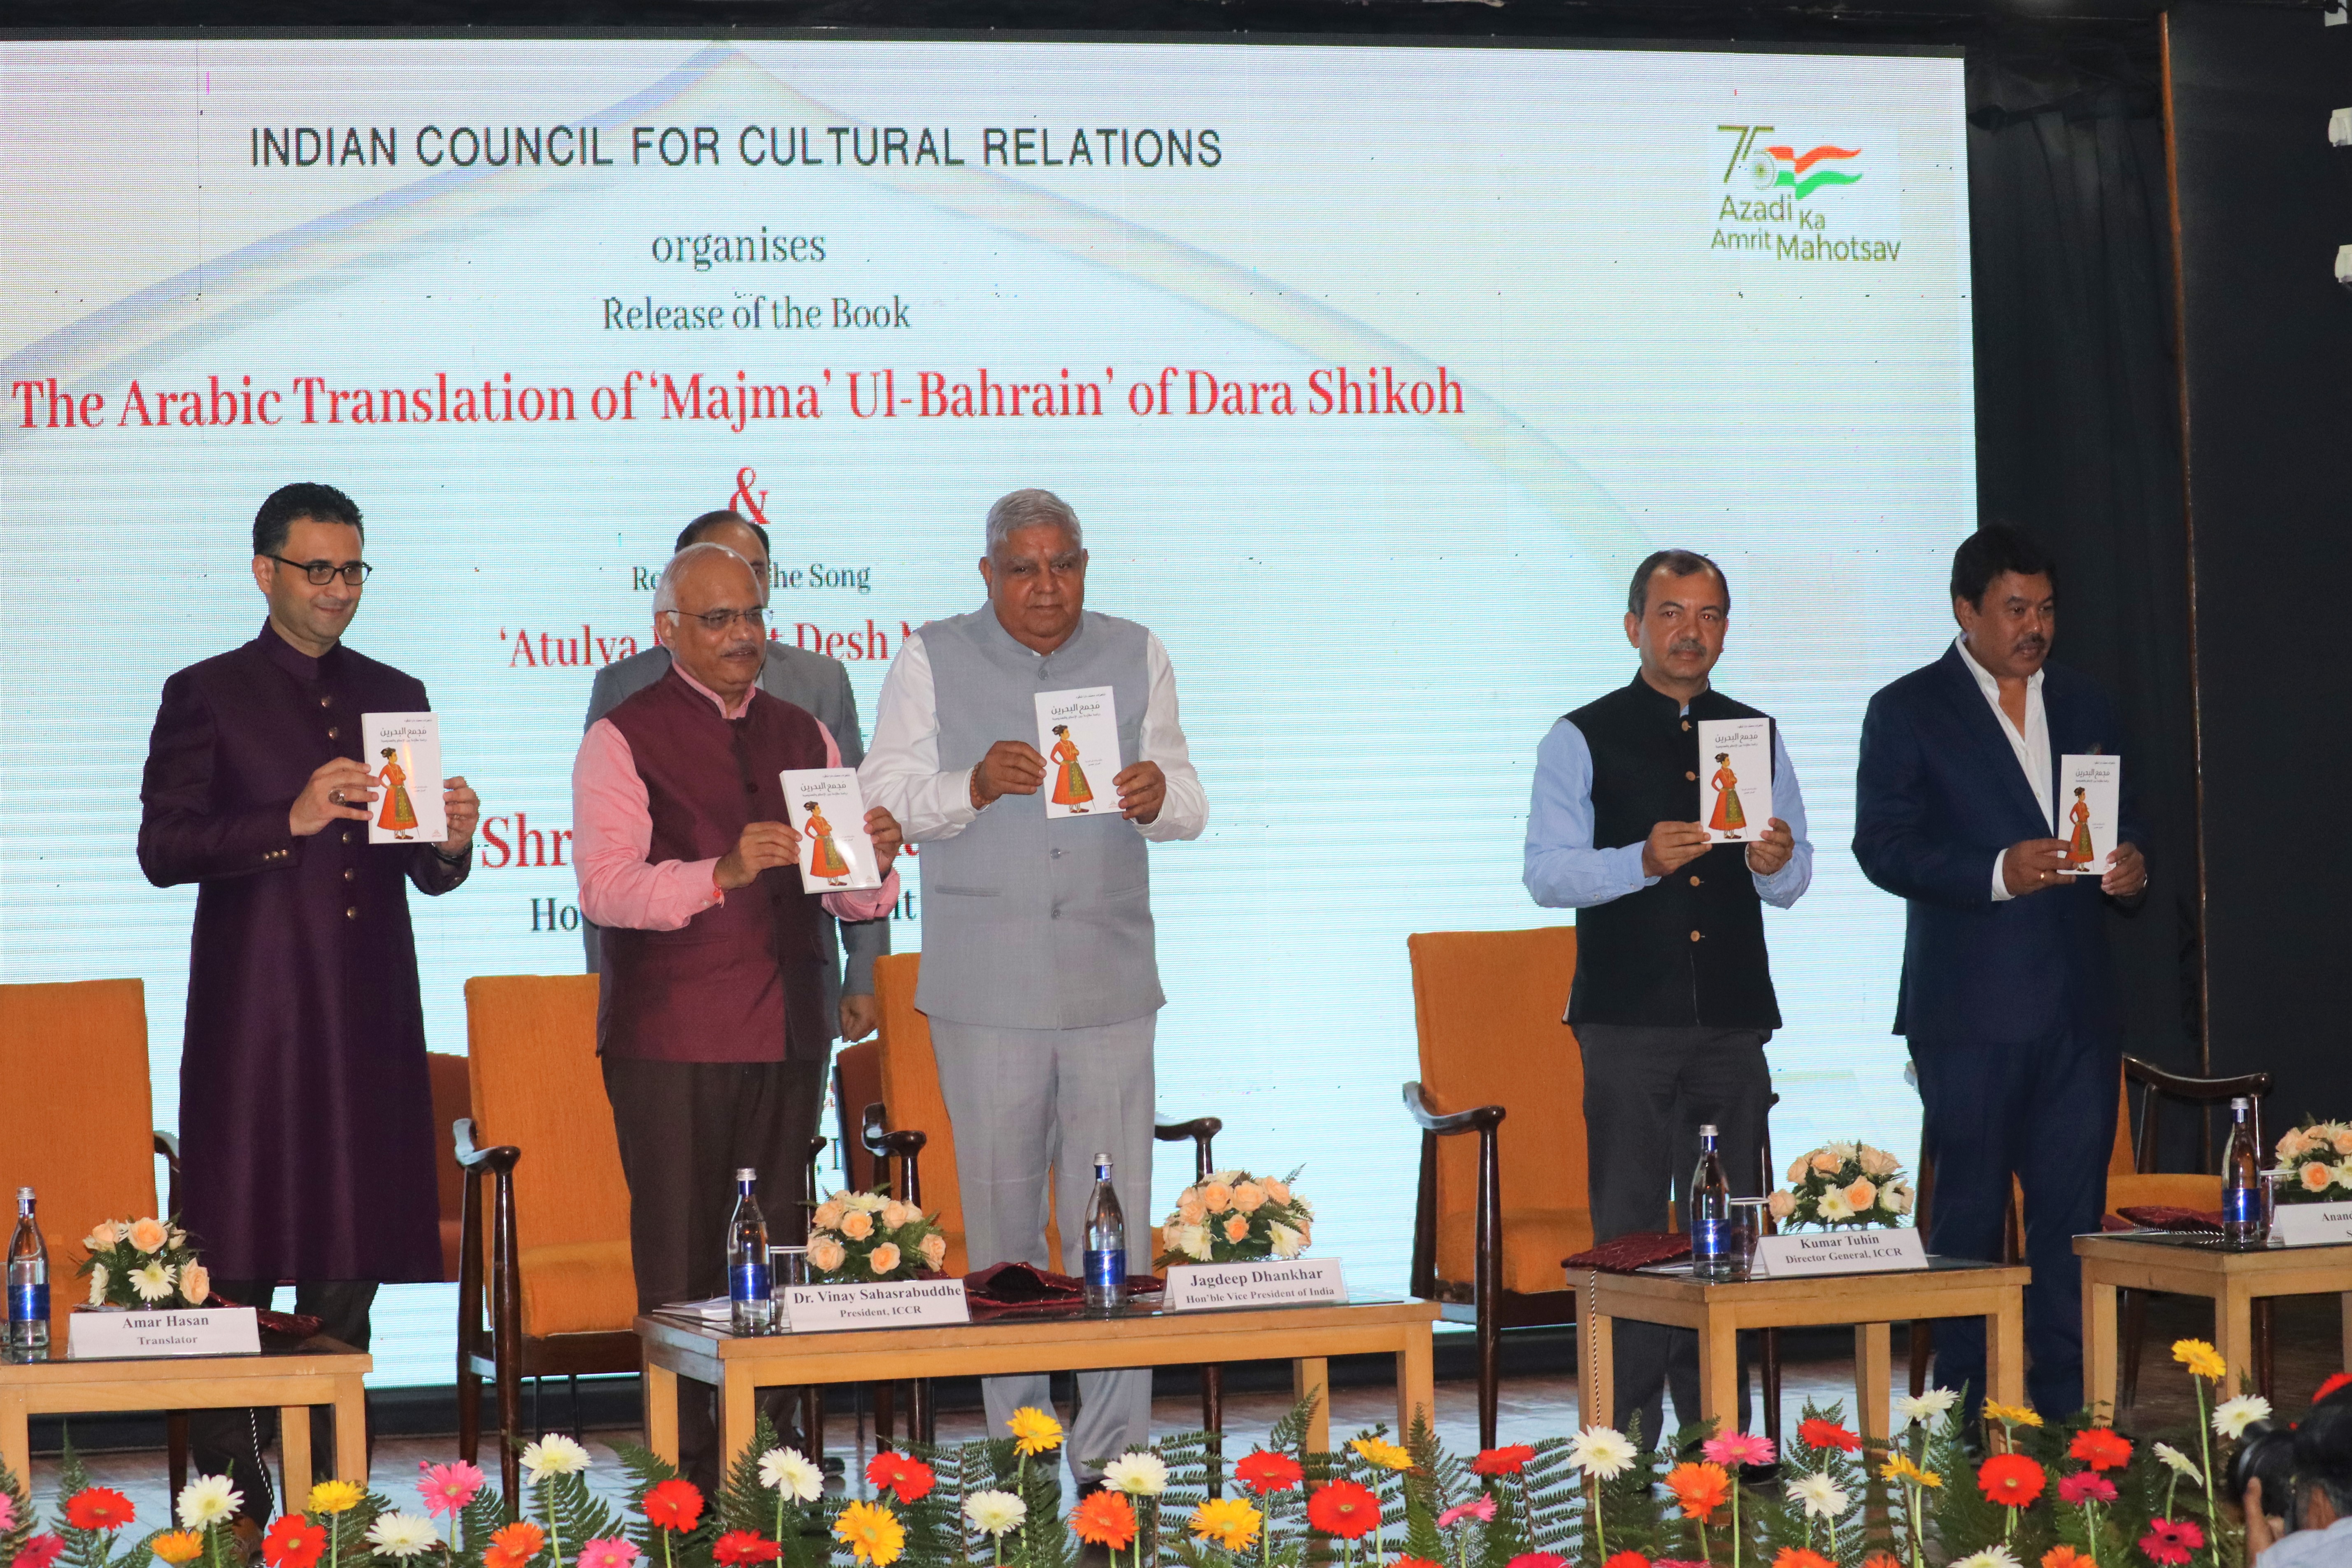 Hon'ble Vice President of India, Shri Jagdeep Dhankhar released the Book ‘Majma’ Ul-Bahrain’ of Dara Shikoh, translated in Arabic by Shri Amar Hasan, and the song “Atulya Bharat - Desh Mera”, rendered by Shri Anand Karki at ICCR Auditorium. Launch of the 